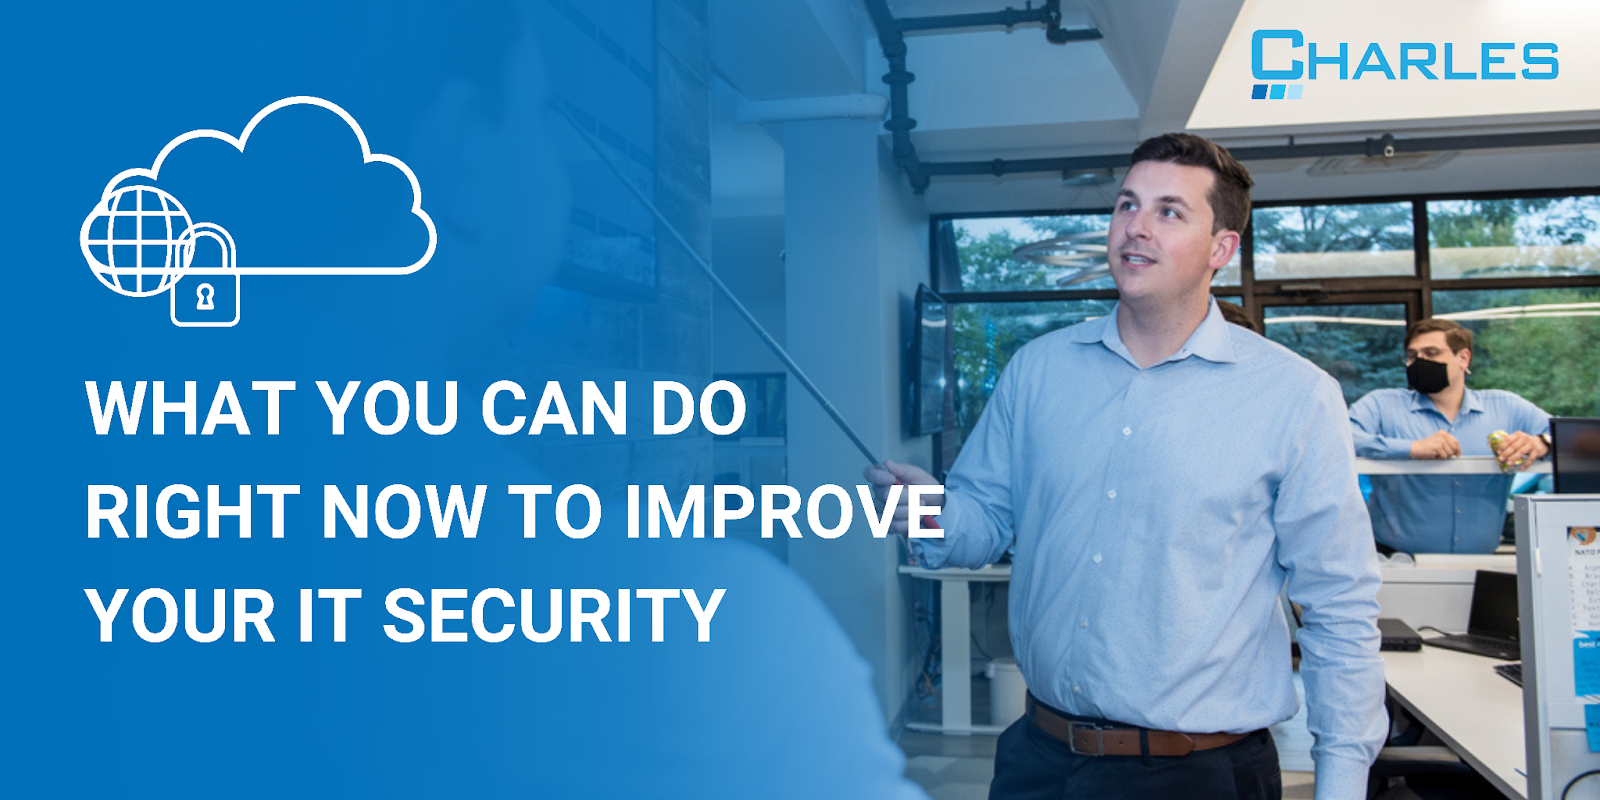 What You Can Do Right Now to Improve Your Security